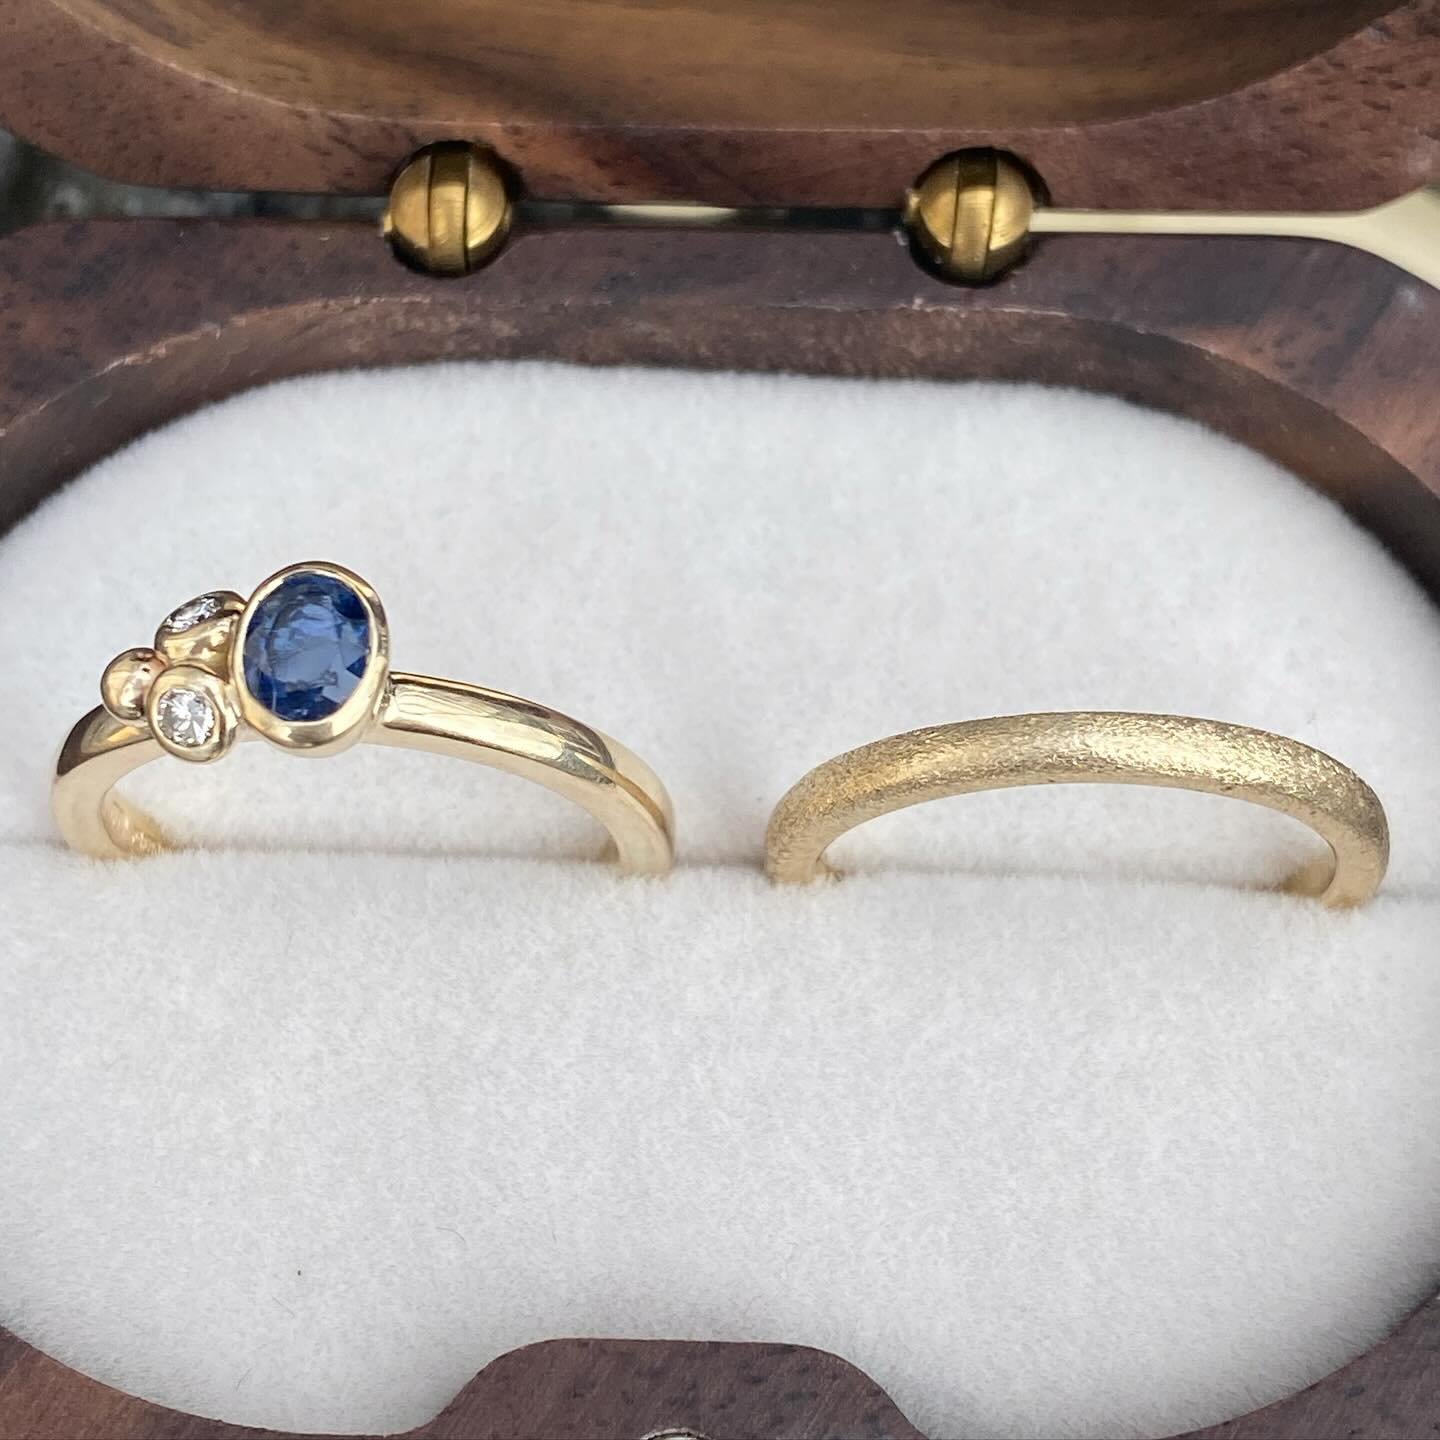 &hellip; A recent remodel &hellip;
💙
Family gems rehomed in a new contemporary setting with an asymmetric twist. Swipe to see a few photos of the process. A pleasure to make these rings for a lovely couple! 
.
.
#bespokejewellery #remodellingjewelle